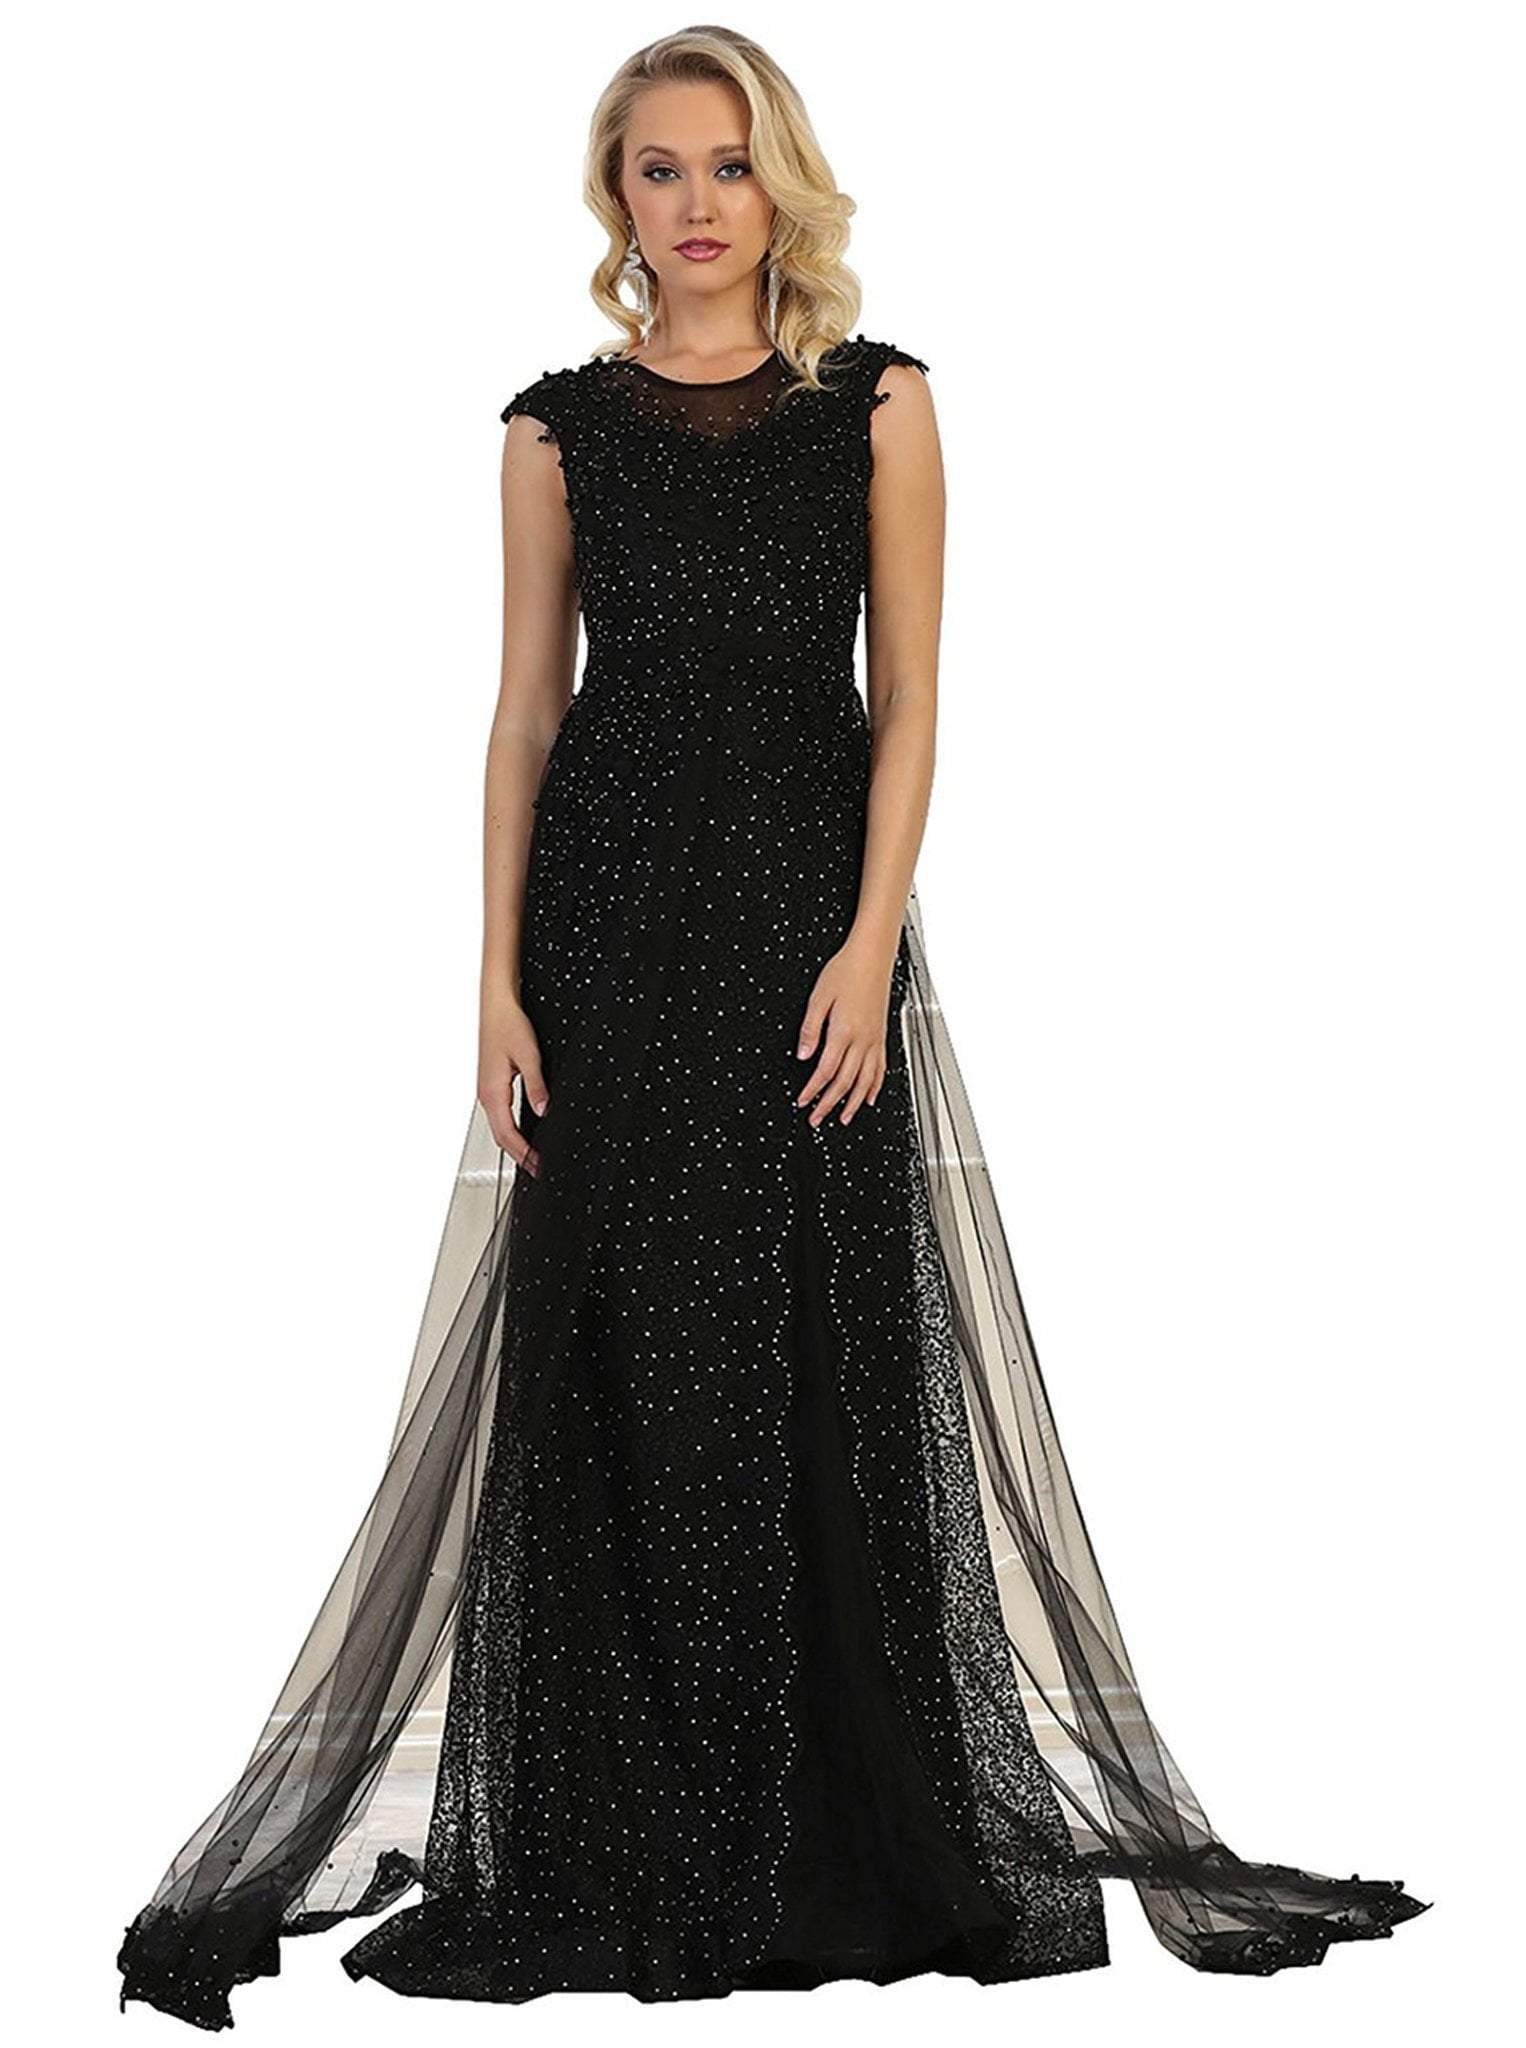 May Queen - RQ7556 Embellished Illusion Jewel Fitted Evening Gown
